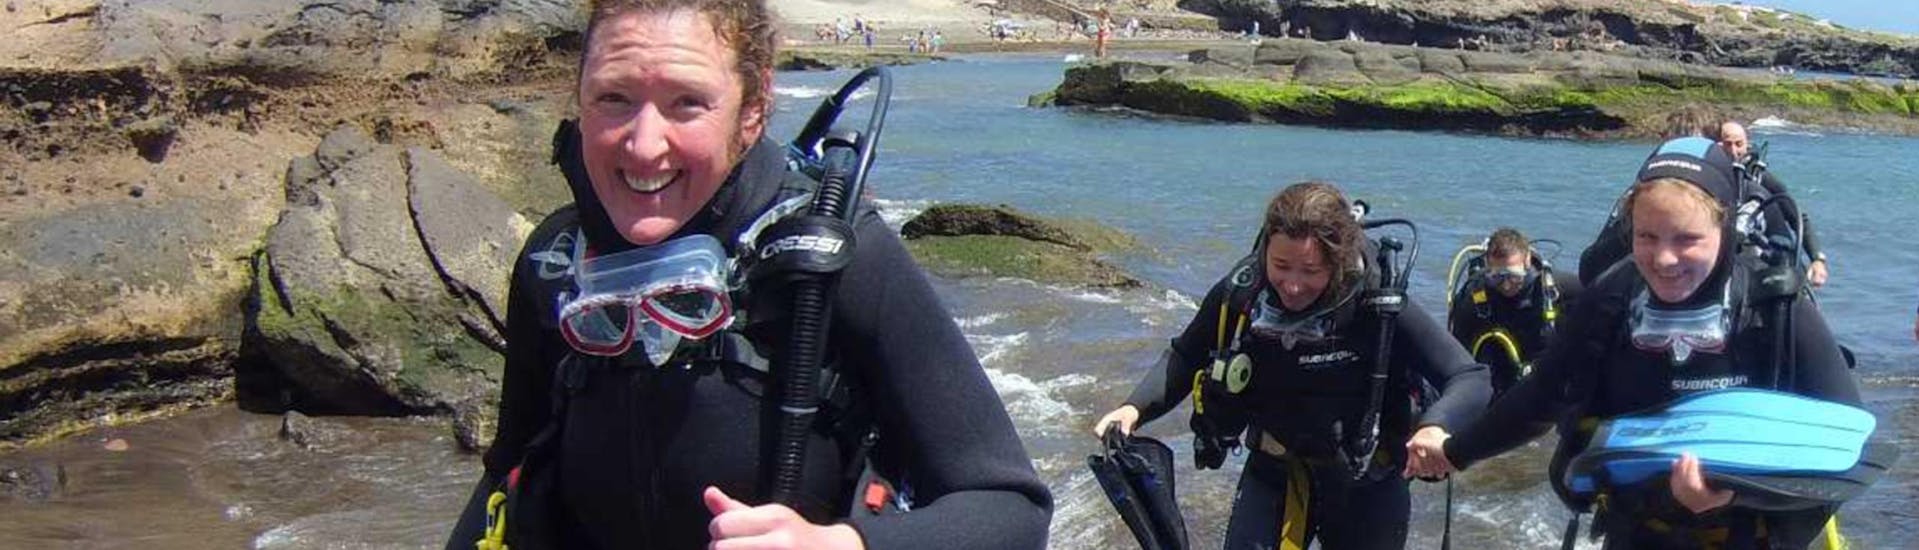 Discover Scuba Diving for Beginners - Costa Adeje.